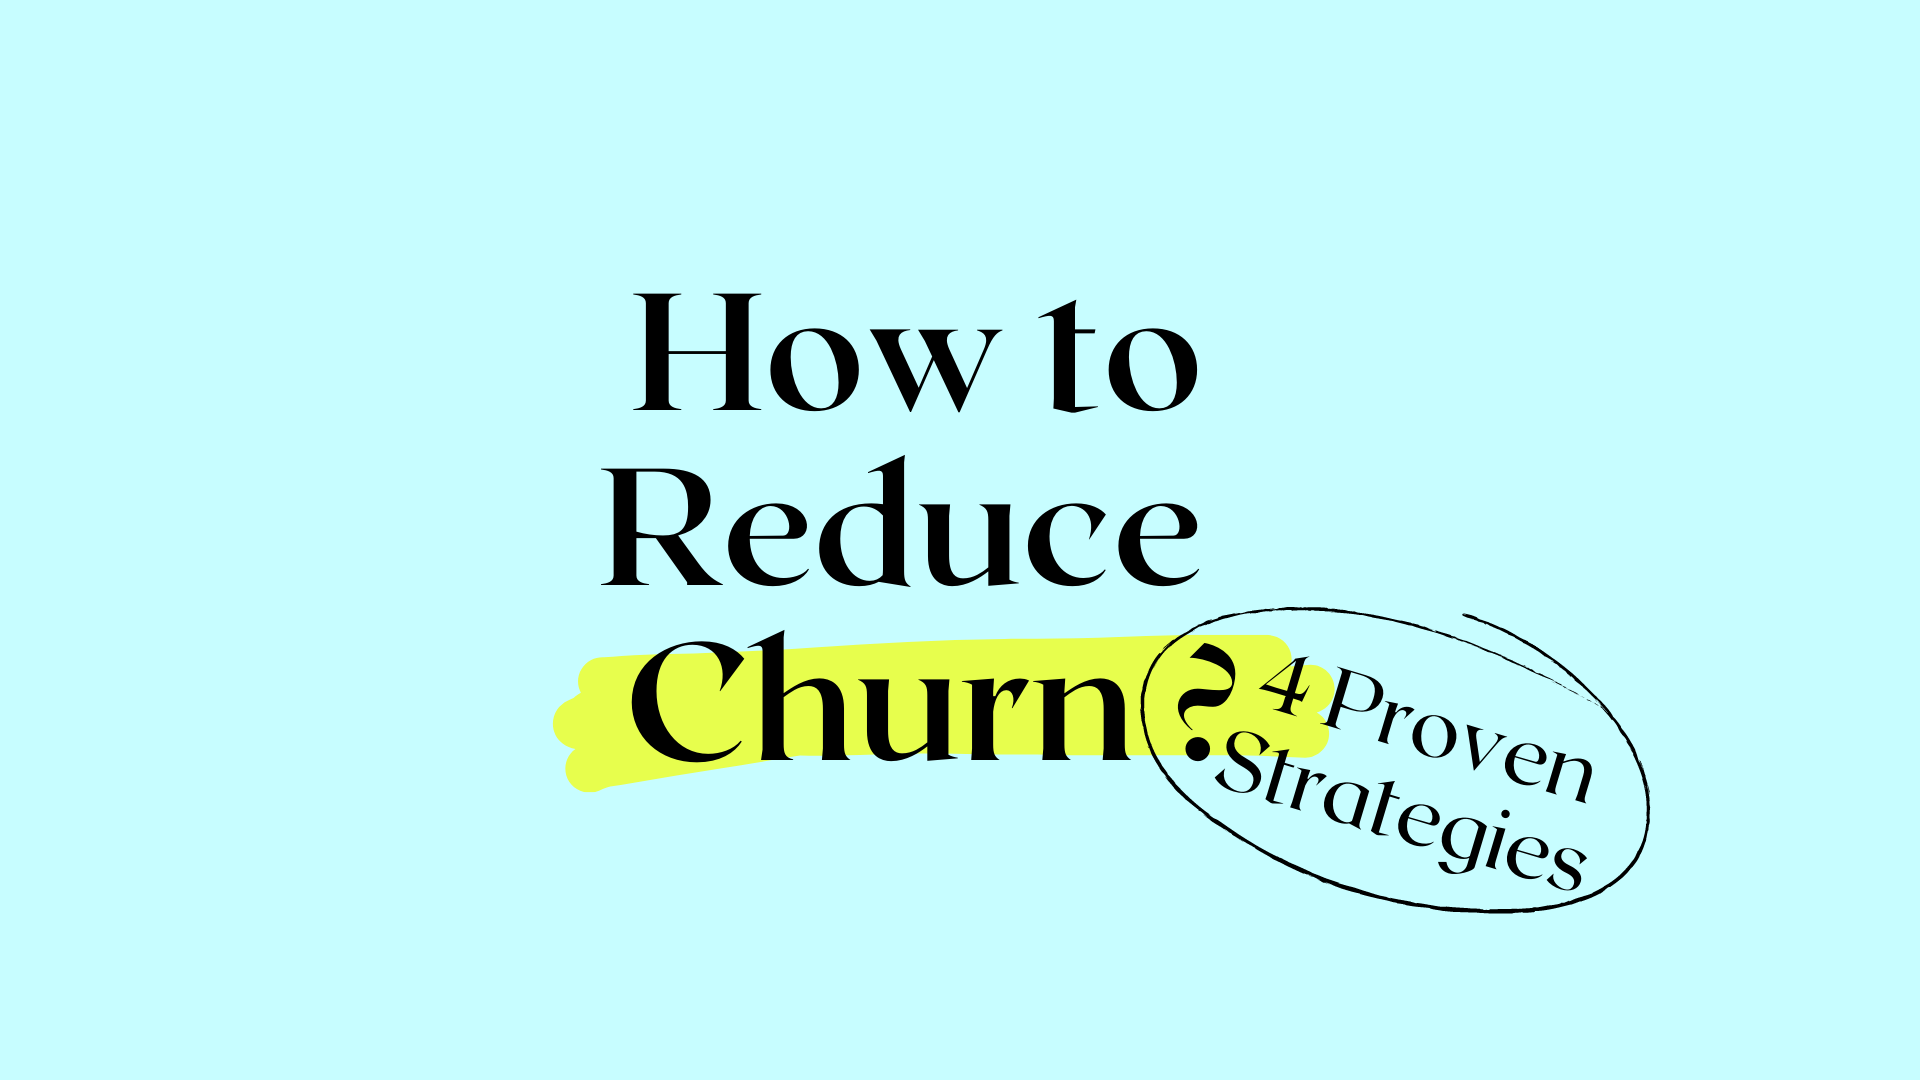 How to Reduce Churn